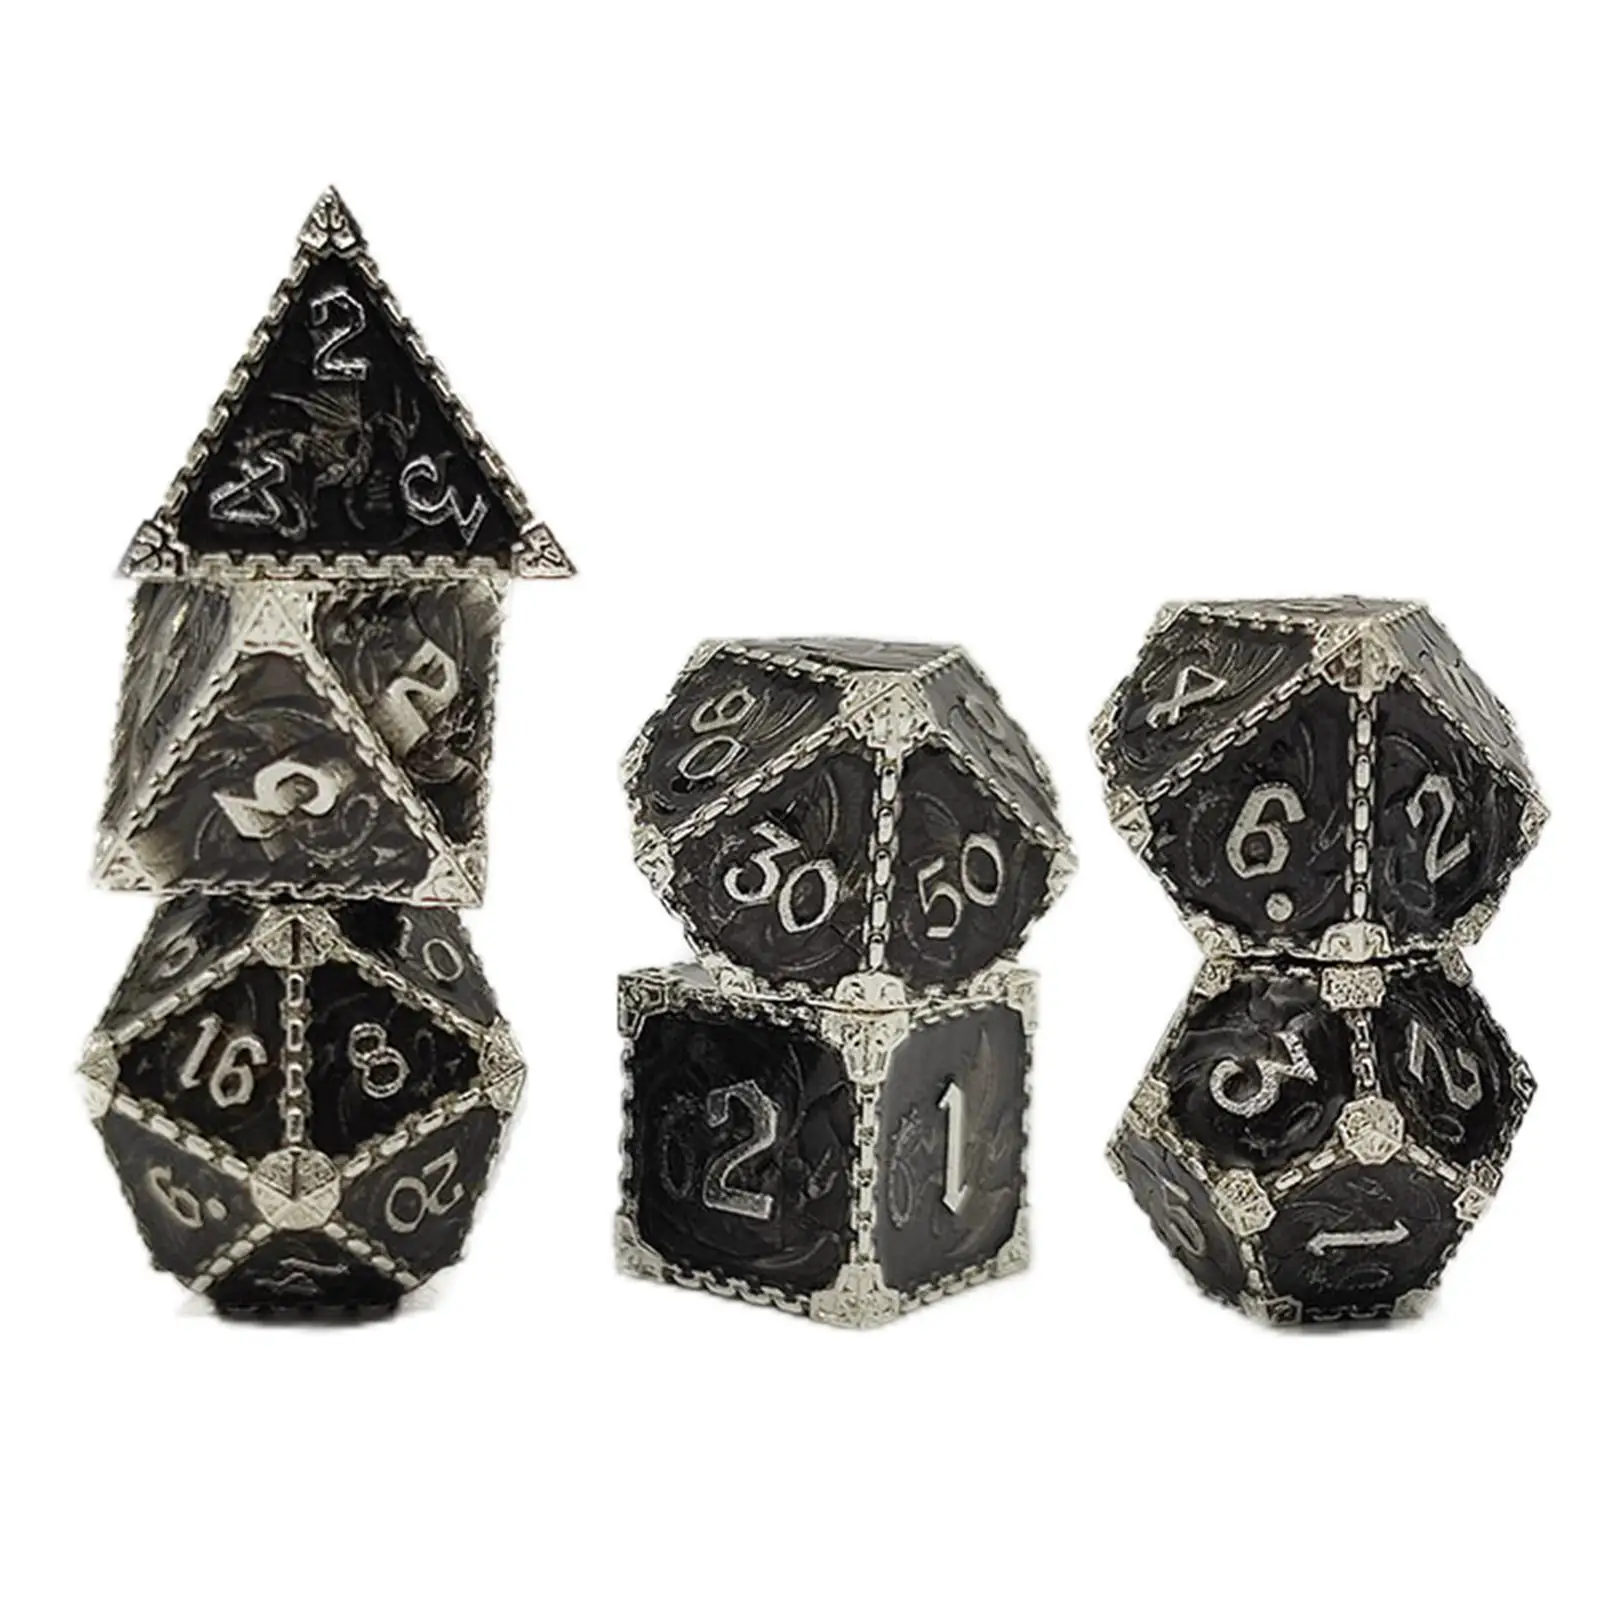 7Pcs Polyhedral Dice Irregular Big Numbers Dice for Party Board Desk Games